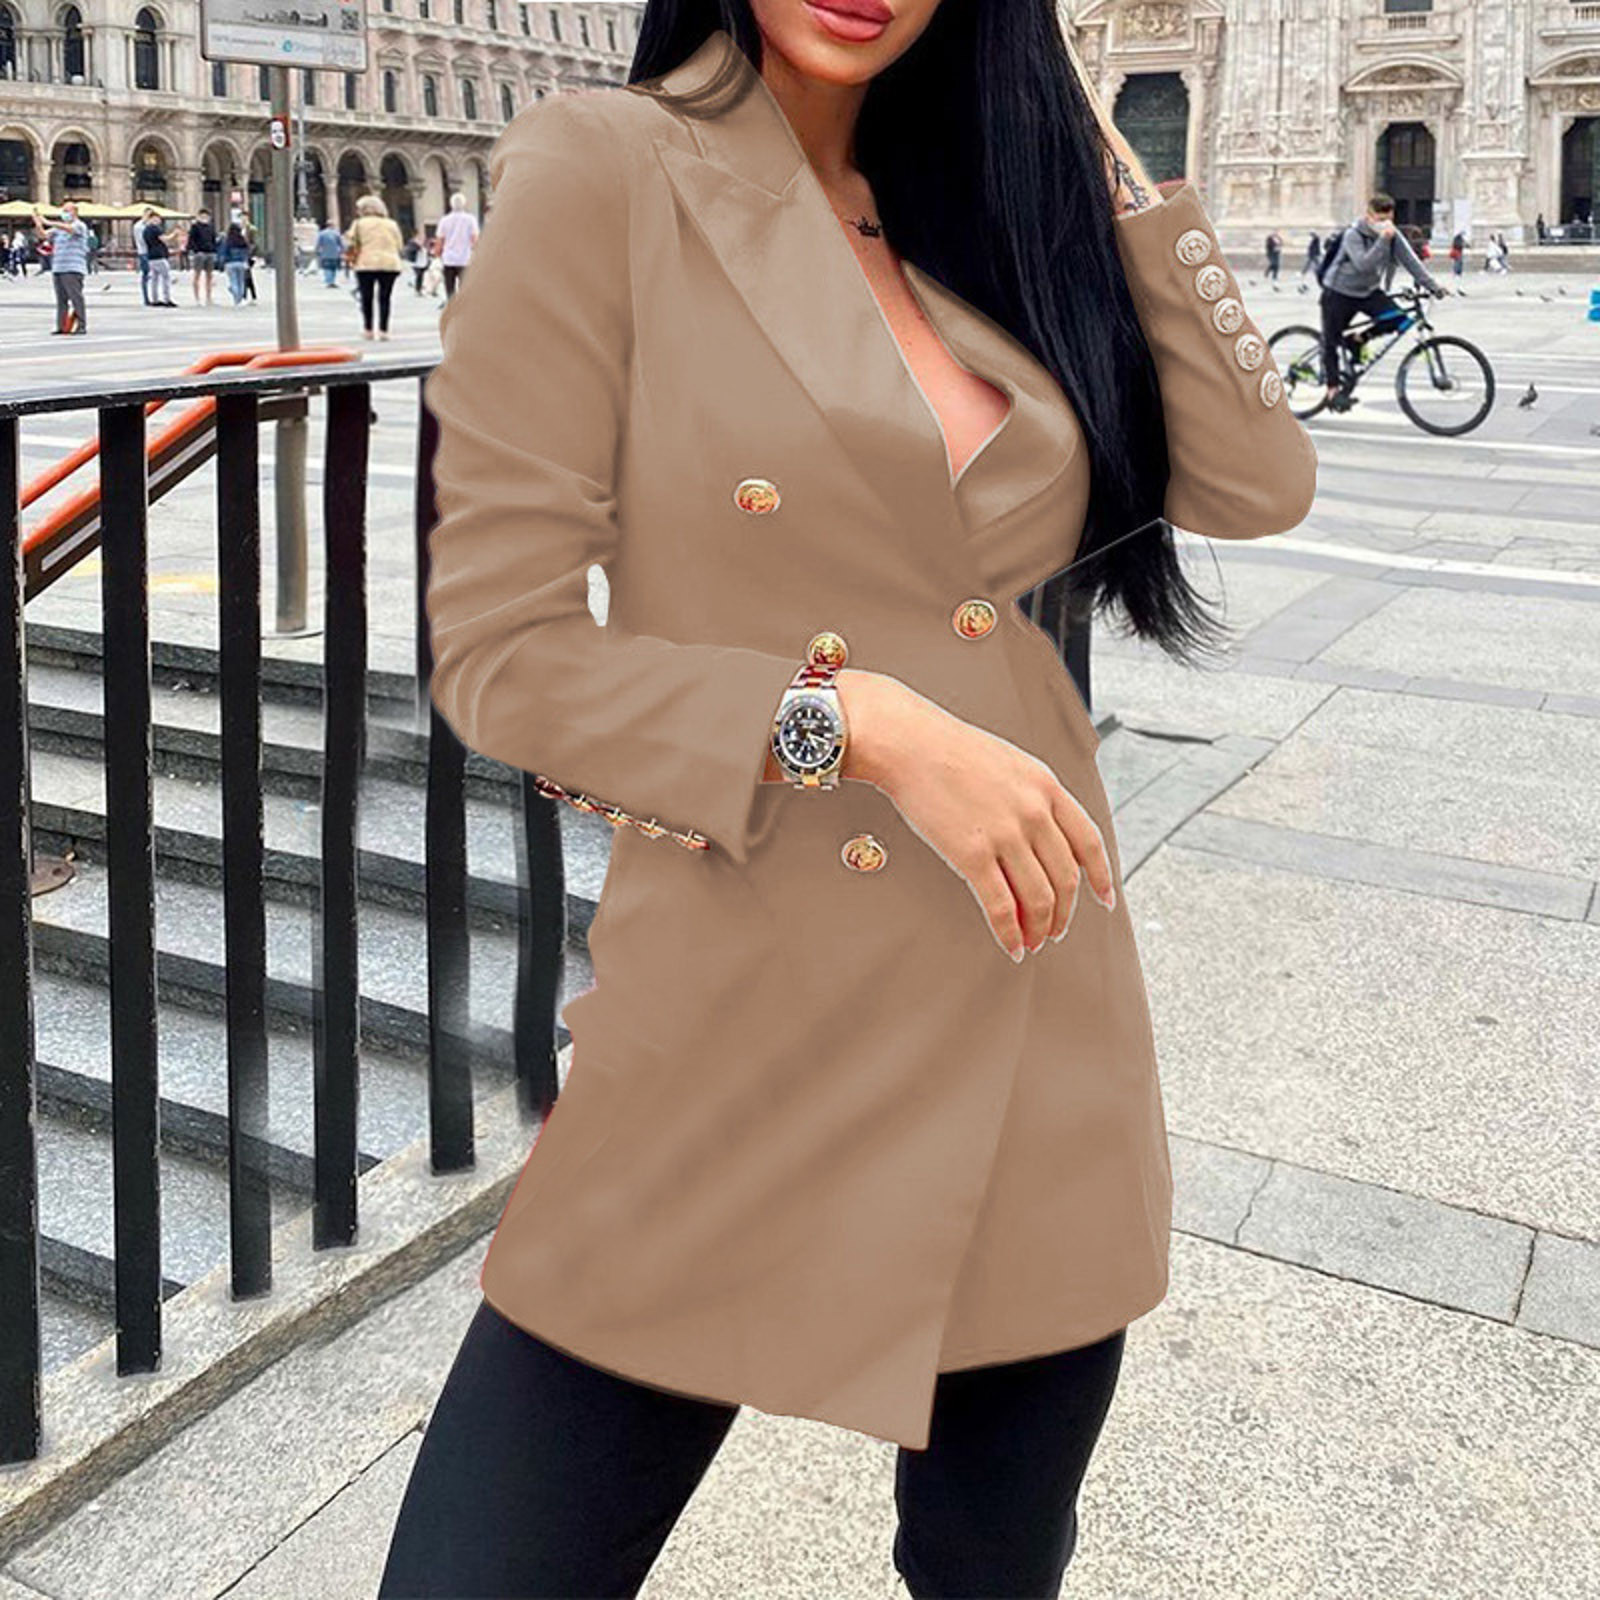 shenzhenyubairong Monogrammed Vest Womens Casual Light Weight Thin Long Jacket Coat Long Sleeve Button Down Chest Pocketed Coats Buttons Blazer Womens